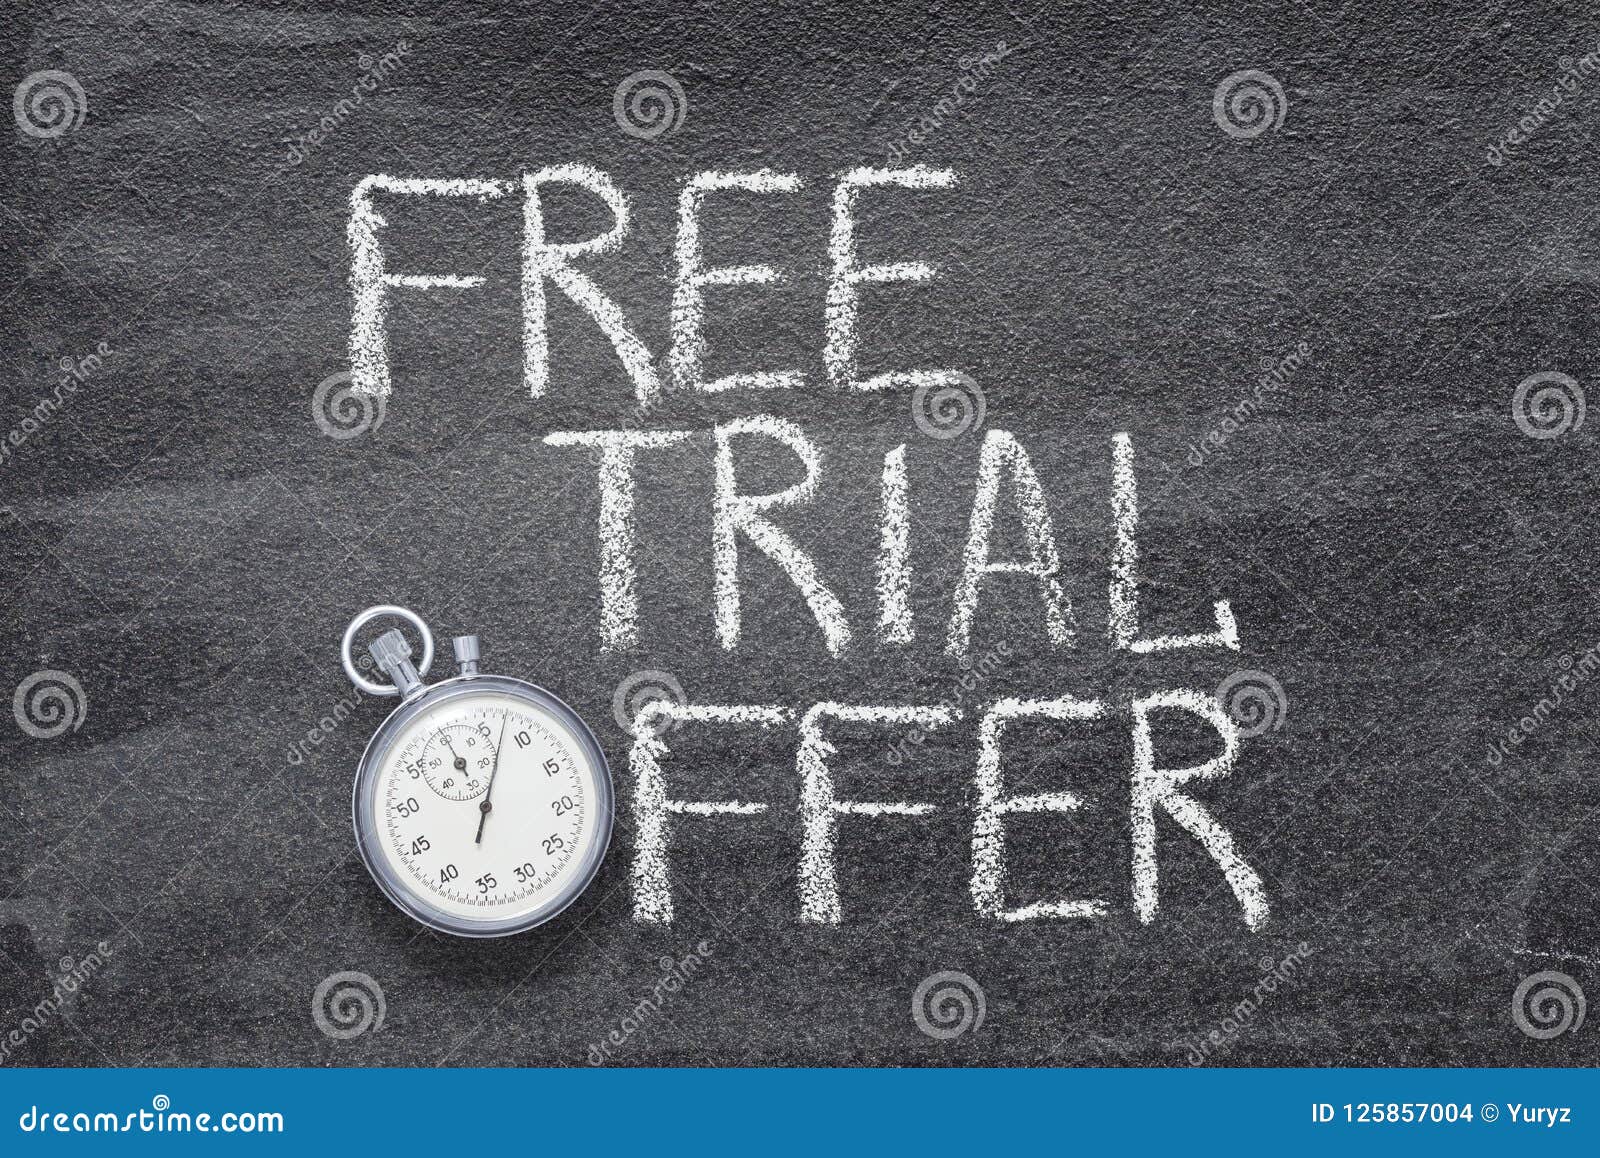 free trial offer watch